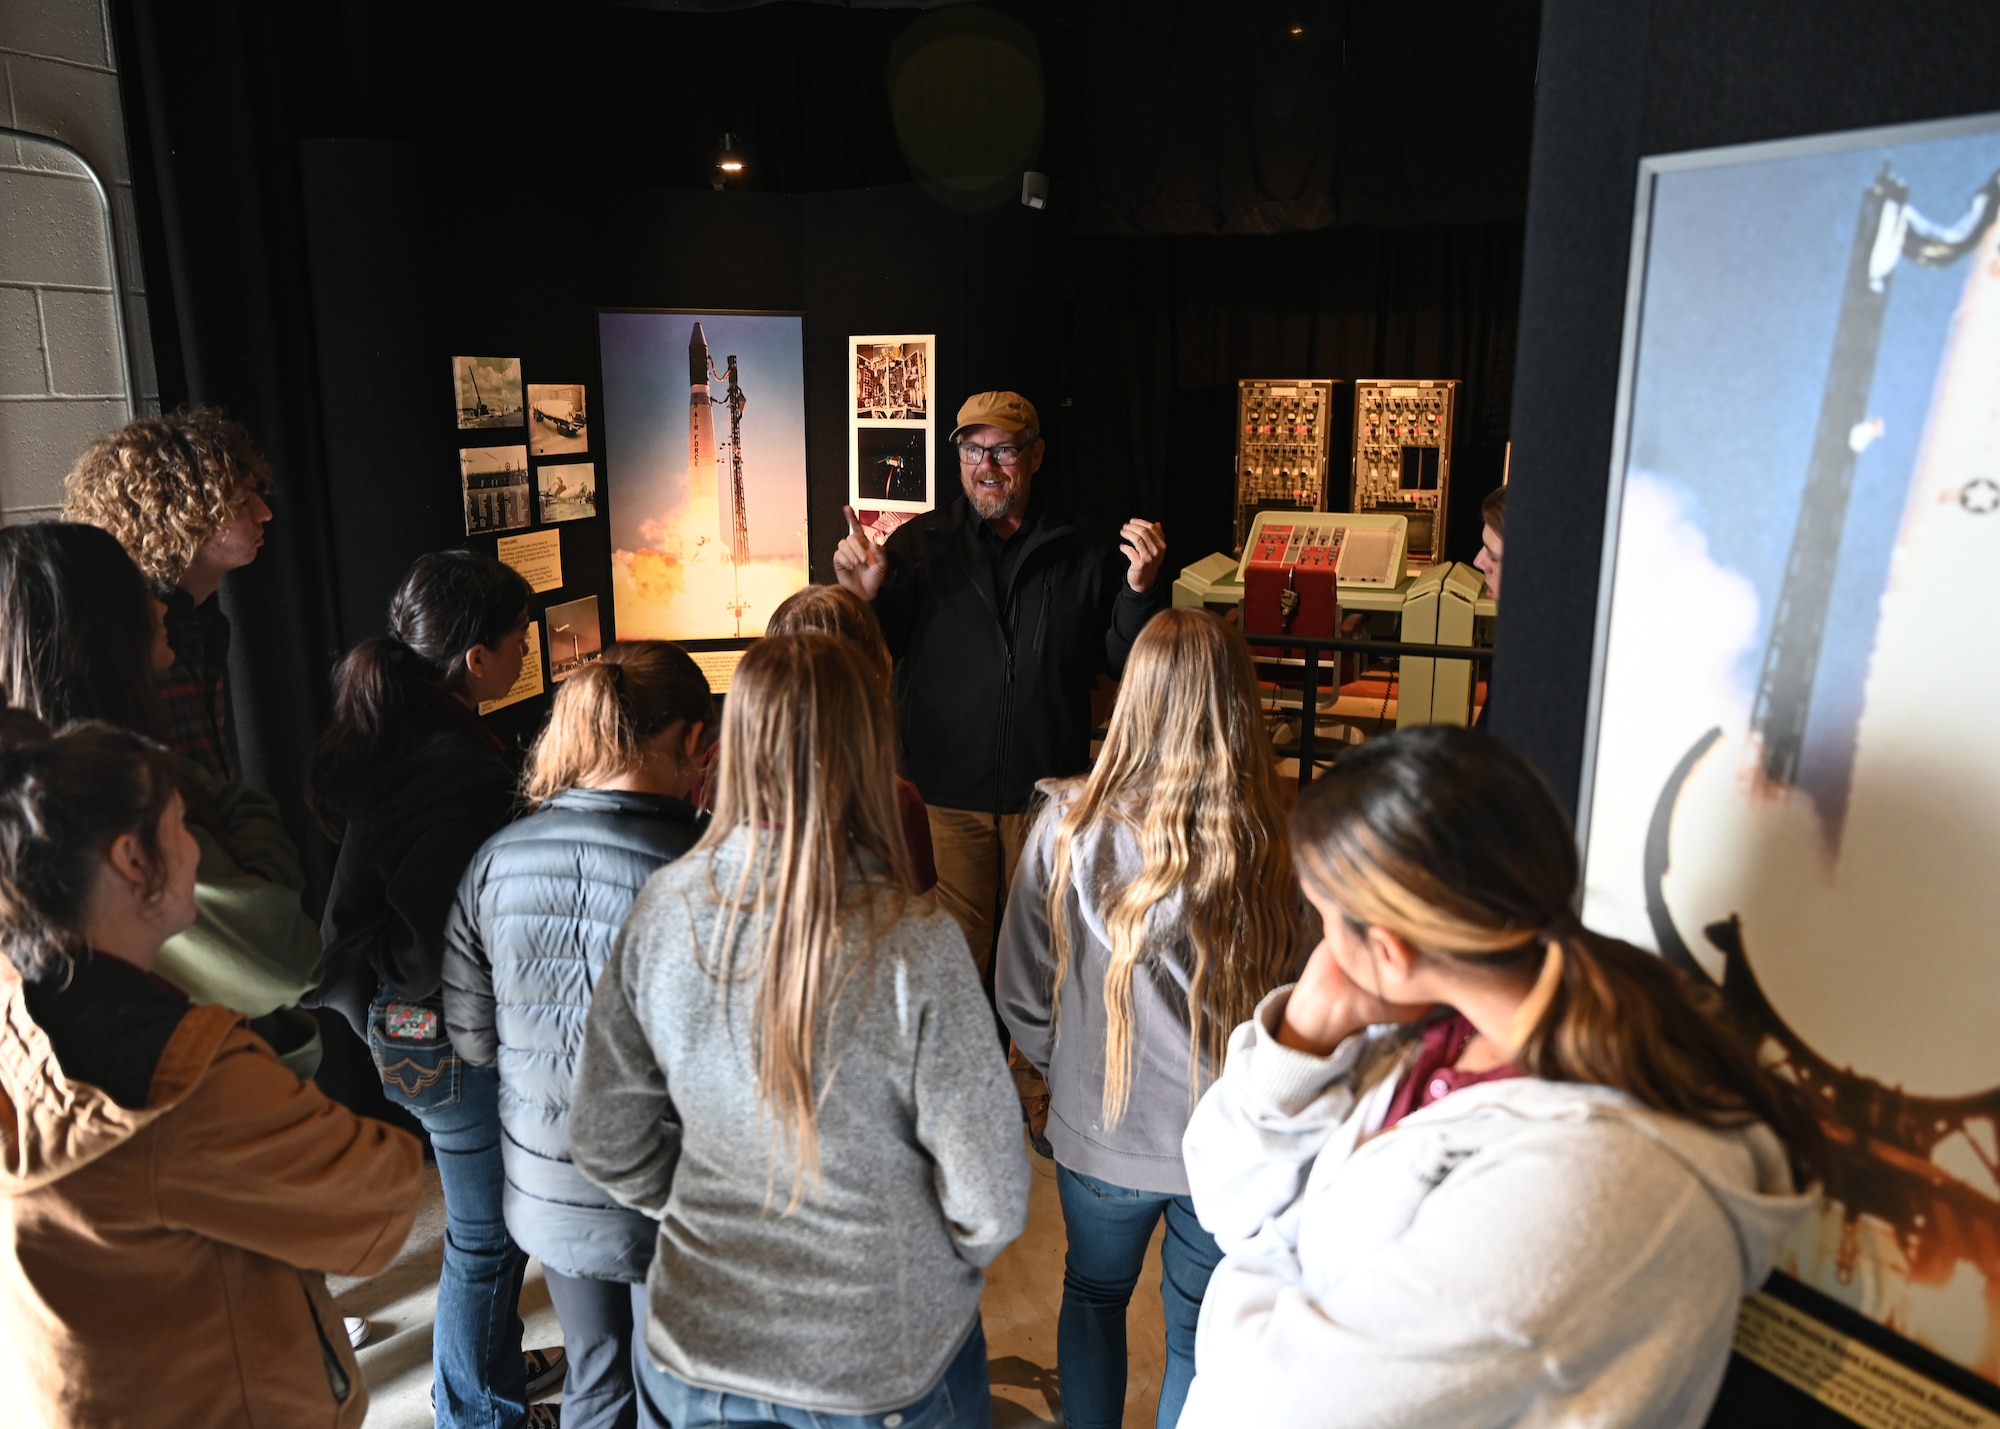 Man speaks to a group of students in museum.